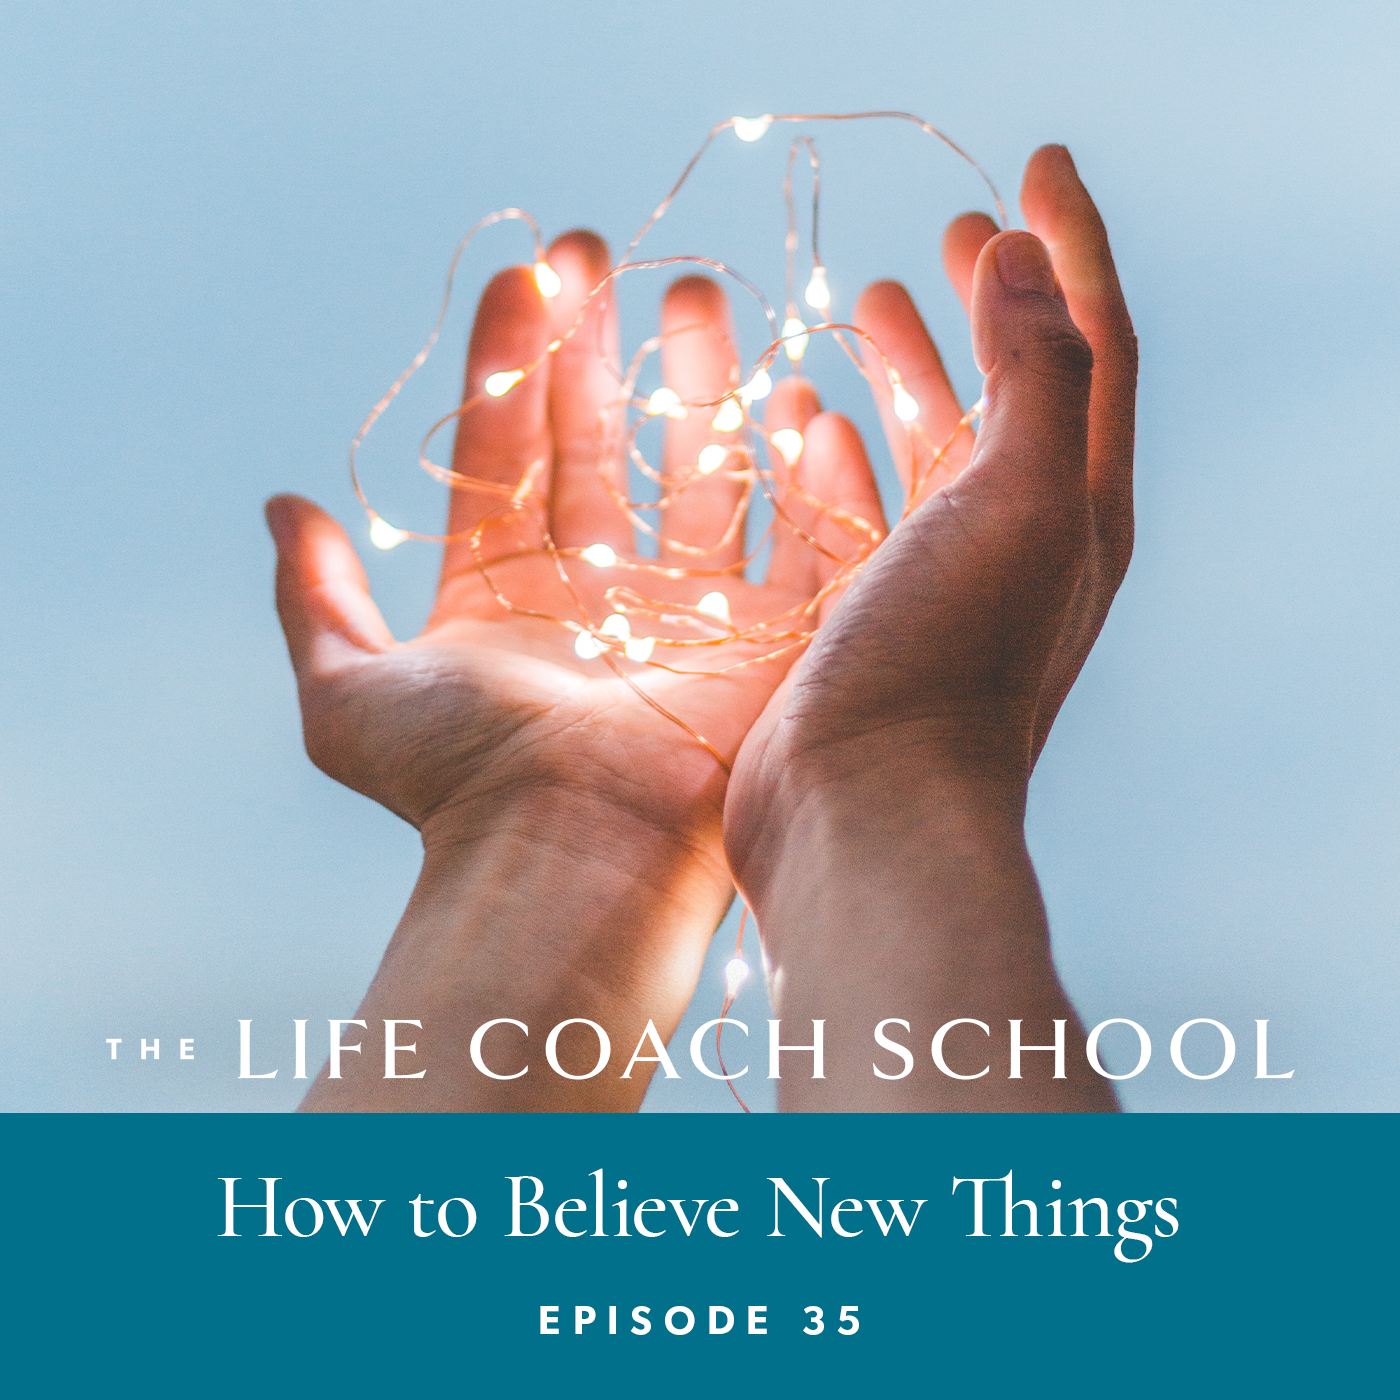 The Life Coach School Podcast with Brooke Castillo | Episode 35 | How to Believe New Things